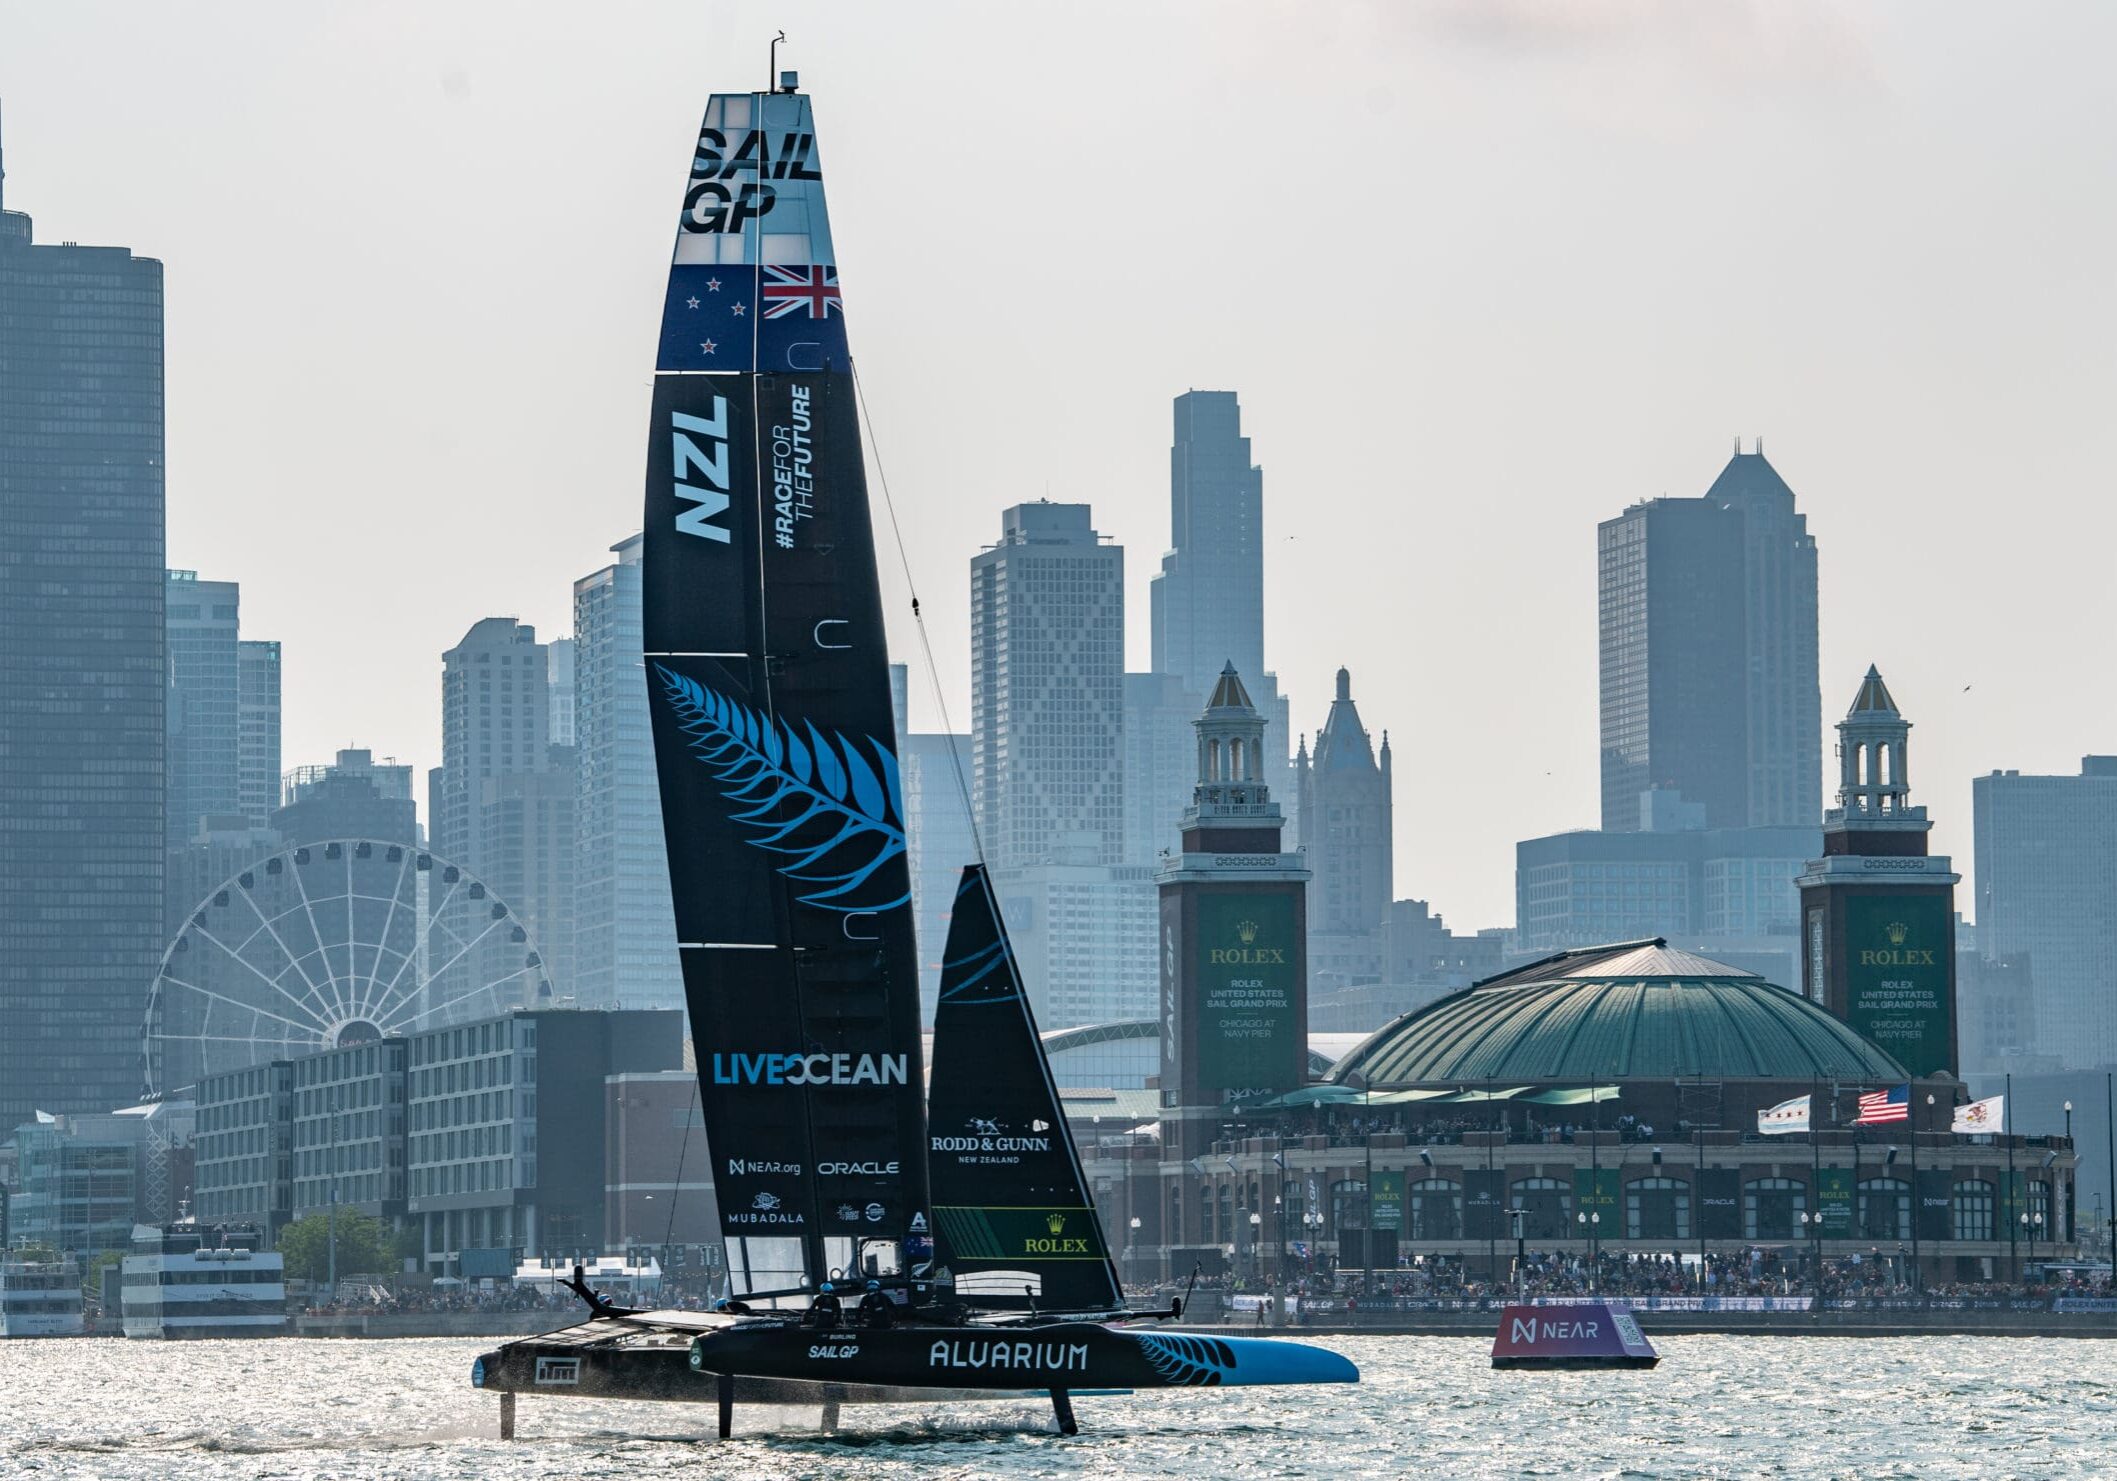 New Zealand SailGP Team helmed by Peter Burling sail toward Navy Pier on Race Day 1 of the Rolex United States Sail Grand Prix | Chicago at Navy Pier, Season 4, in Chicago, Illinois, USA. 16th June 2023. Photo: Ricardo Pinto for SailGP. Handout image supplied by SailGP